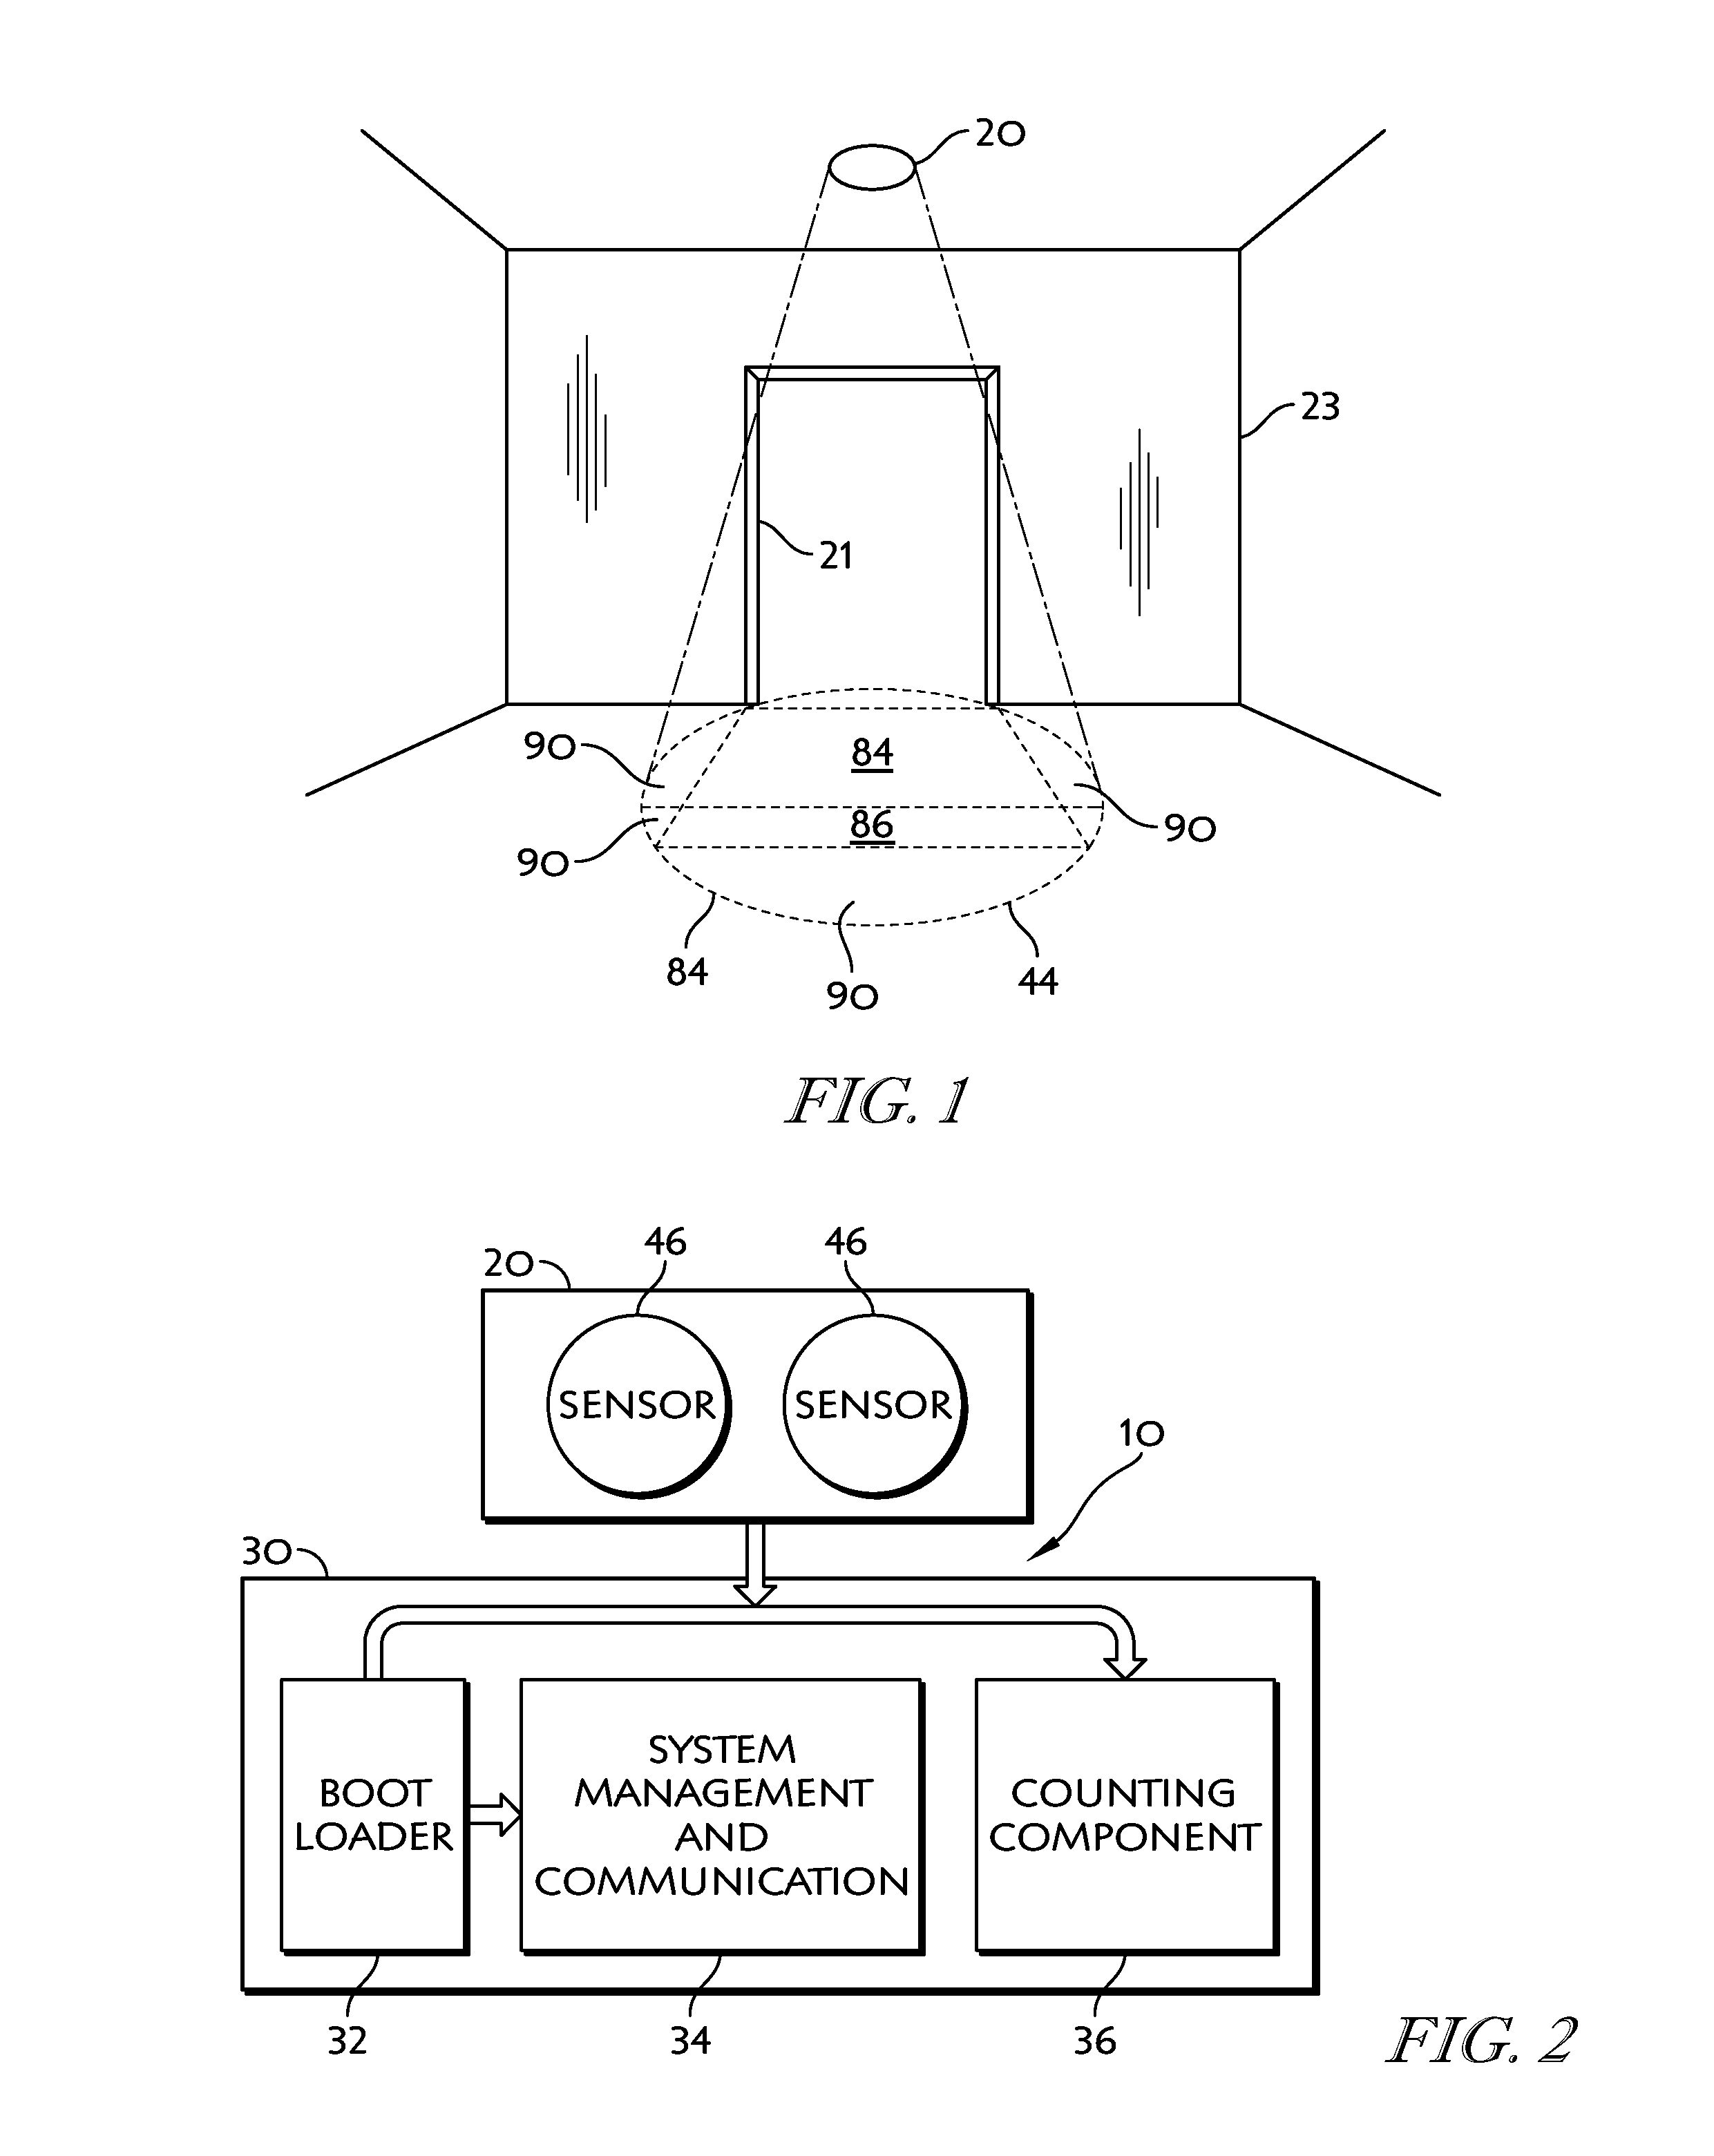 System and method for detecting, tracking and counting human objects of interest using a counting system and a data capture device